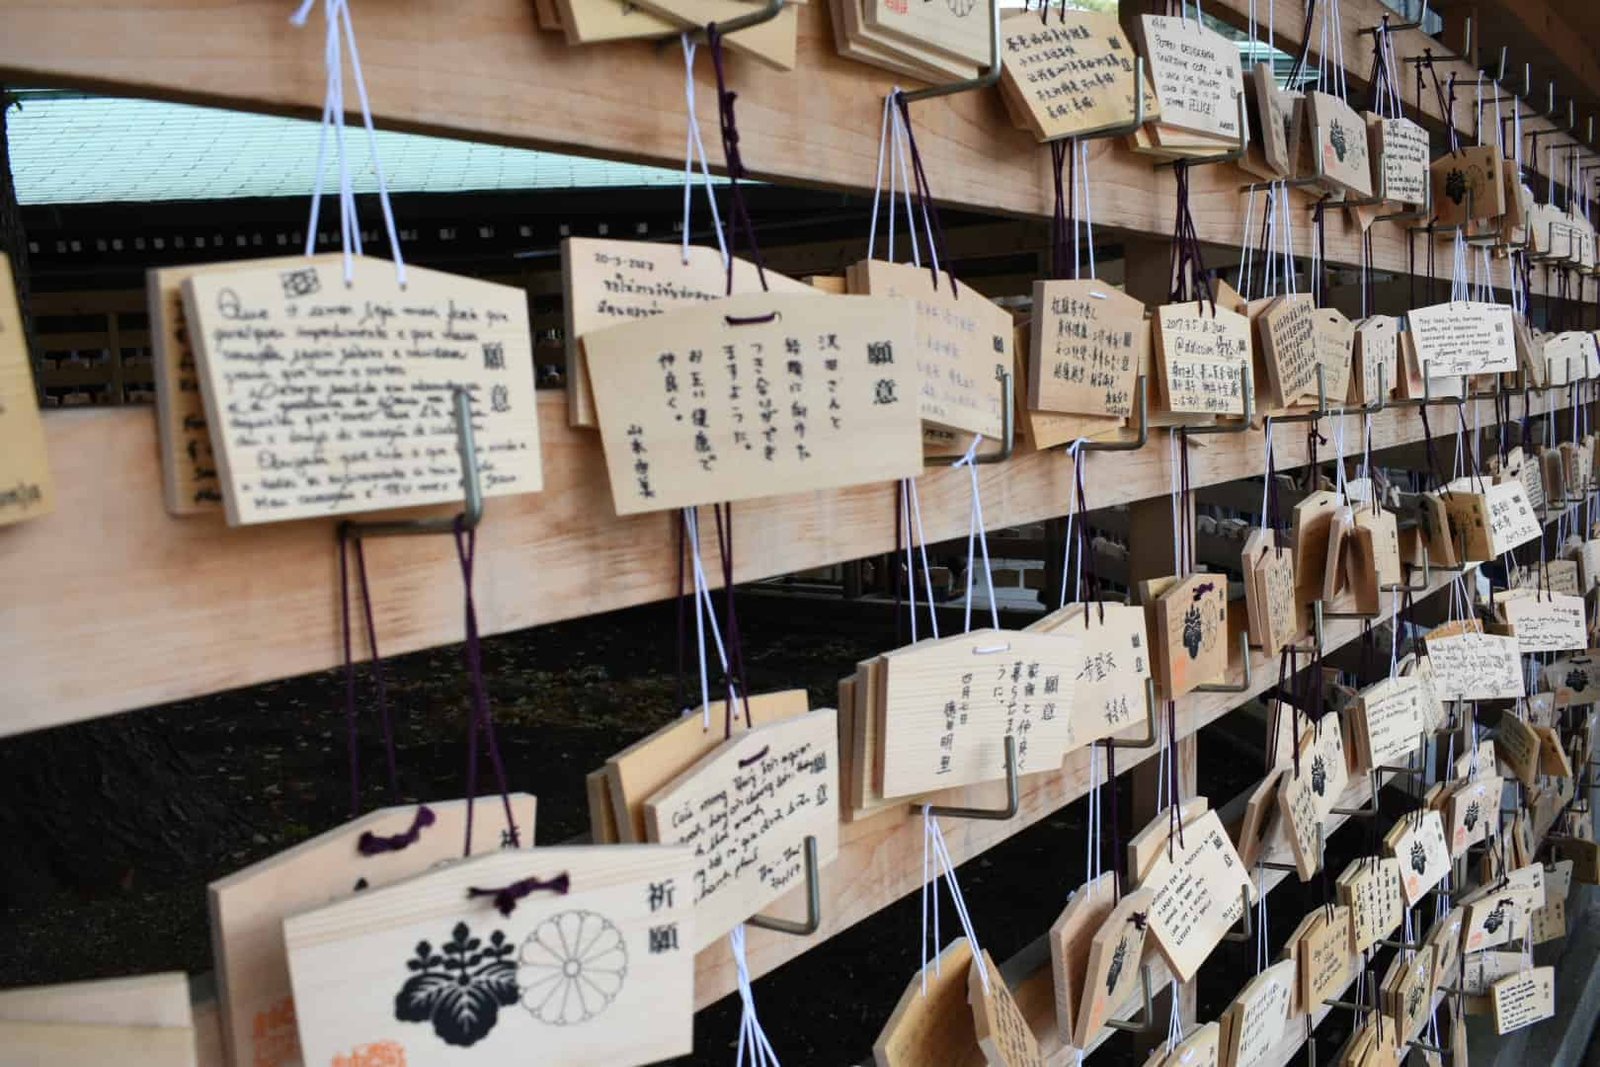 The famous Meiji Shrine is amongst the most incredible things to do in Tokyo including famous attractions, hidden gems, cherry blossom trees, and top Tokyo bucketlist items. Plus helpful Tokyo tips and tricks for first timers and solo travellers. #tokyo #japan #traveljapan